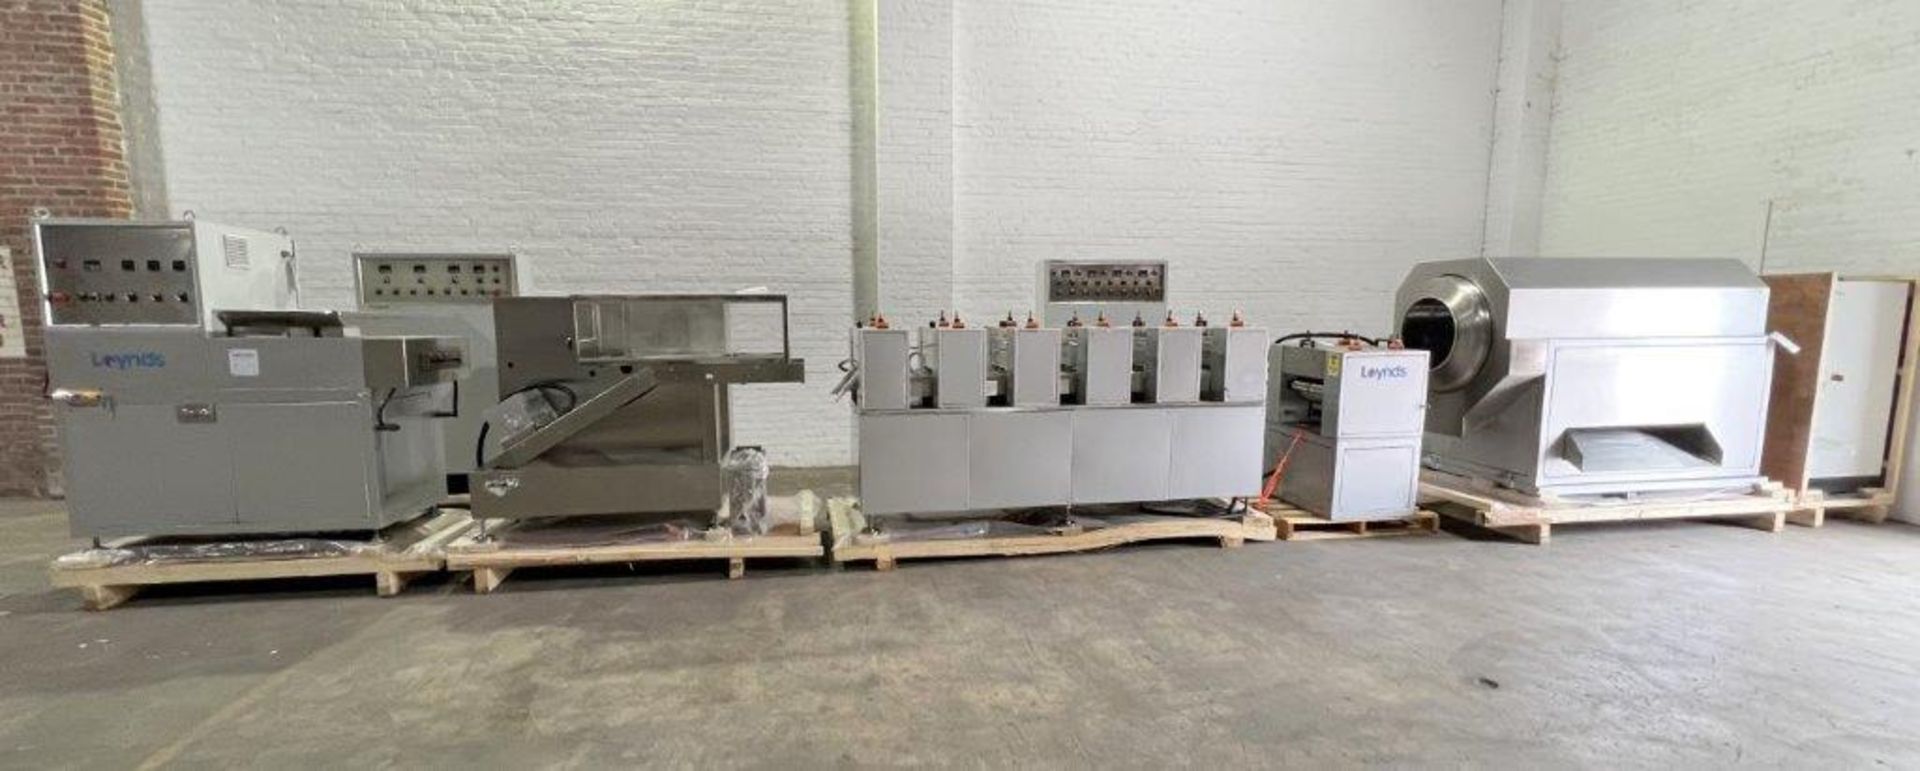 Loynds 300 mm Wide Rolling & Scoring Line for Chiclets - Image 79 of 85